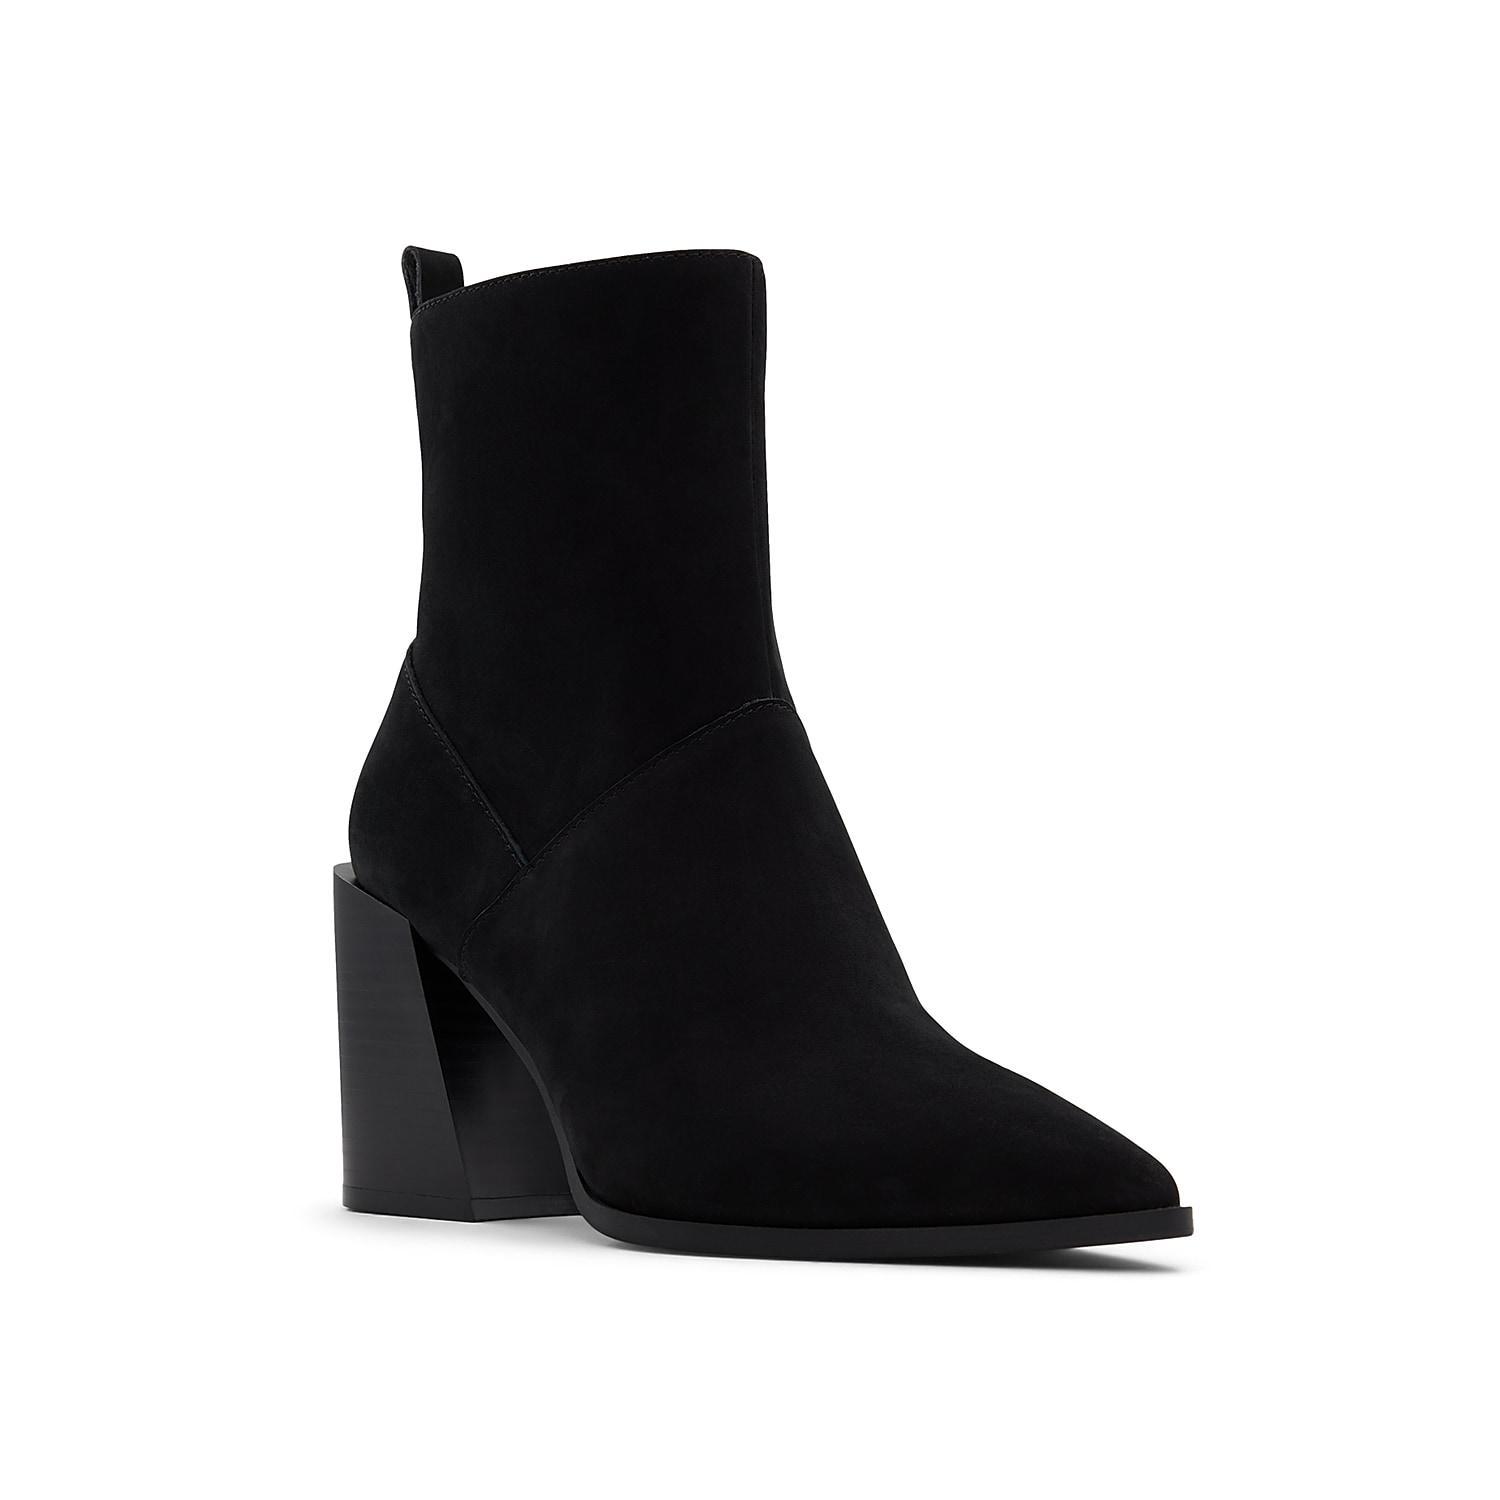 ALDO Bethanny Pointed Toe Block Heel Bootie Product Image